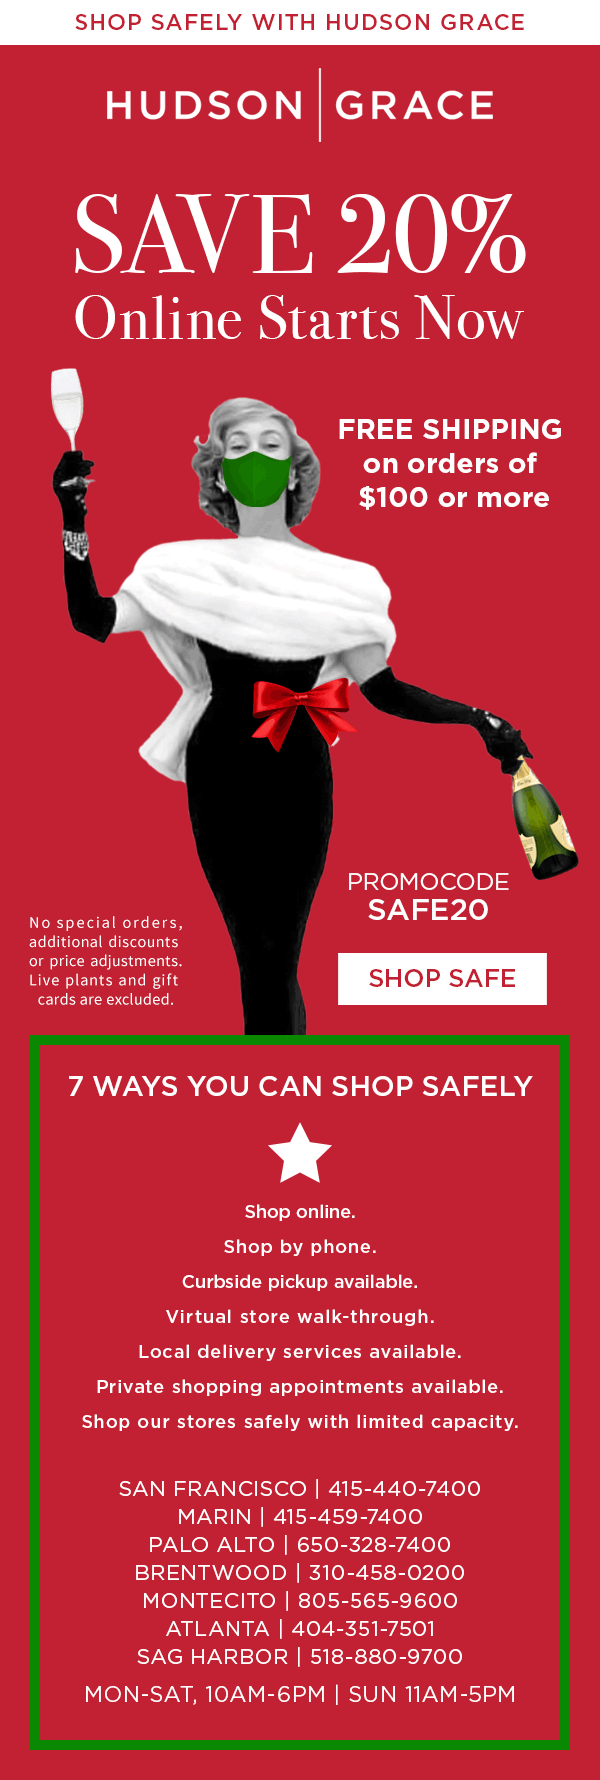 Sip at Home, Shop Safely. Save 20% and free shipping on orders of $100 or more. Use promocode SAFE20